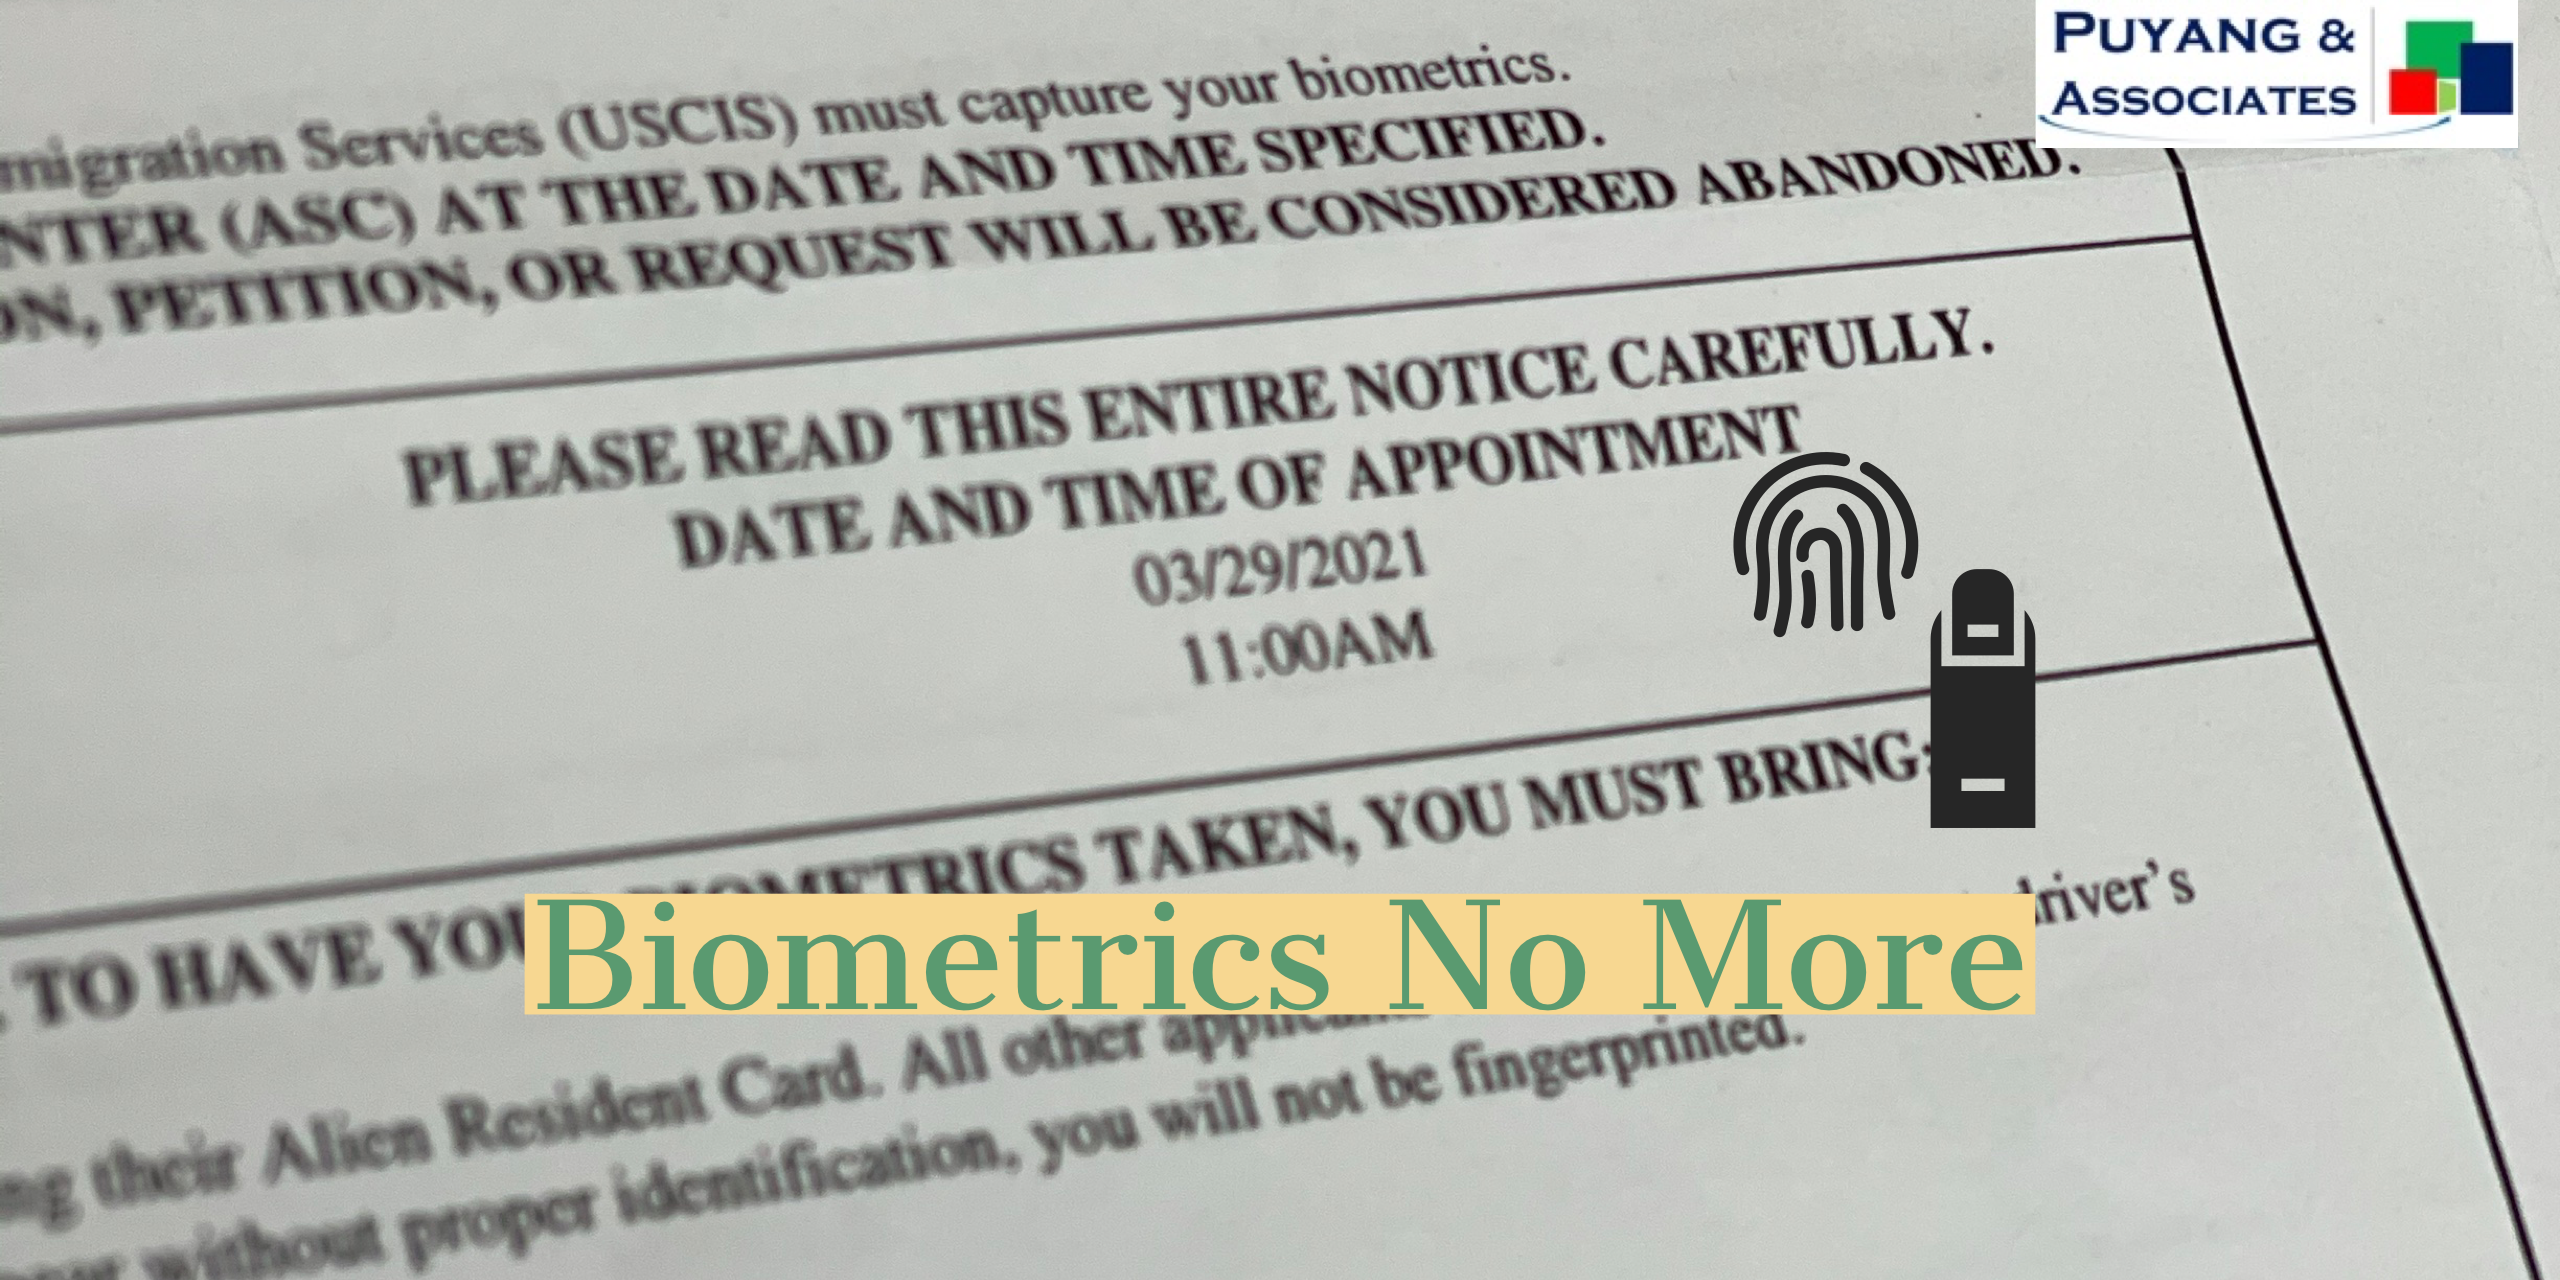 Breaking: USCIS to Eliminate Biometrics Requirement for I-539 filers starting May 17, 2021